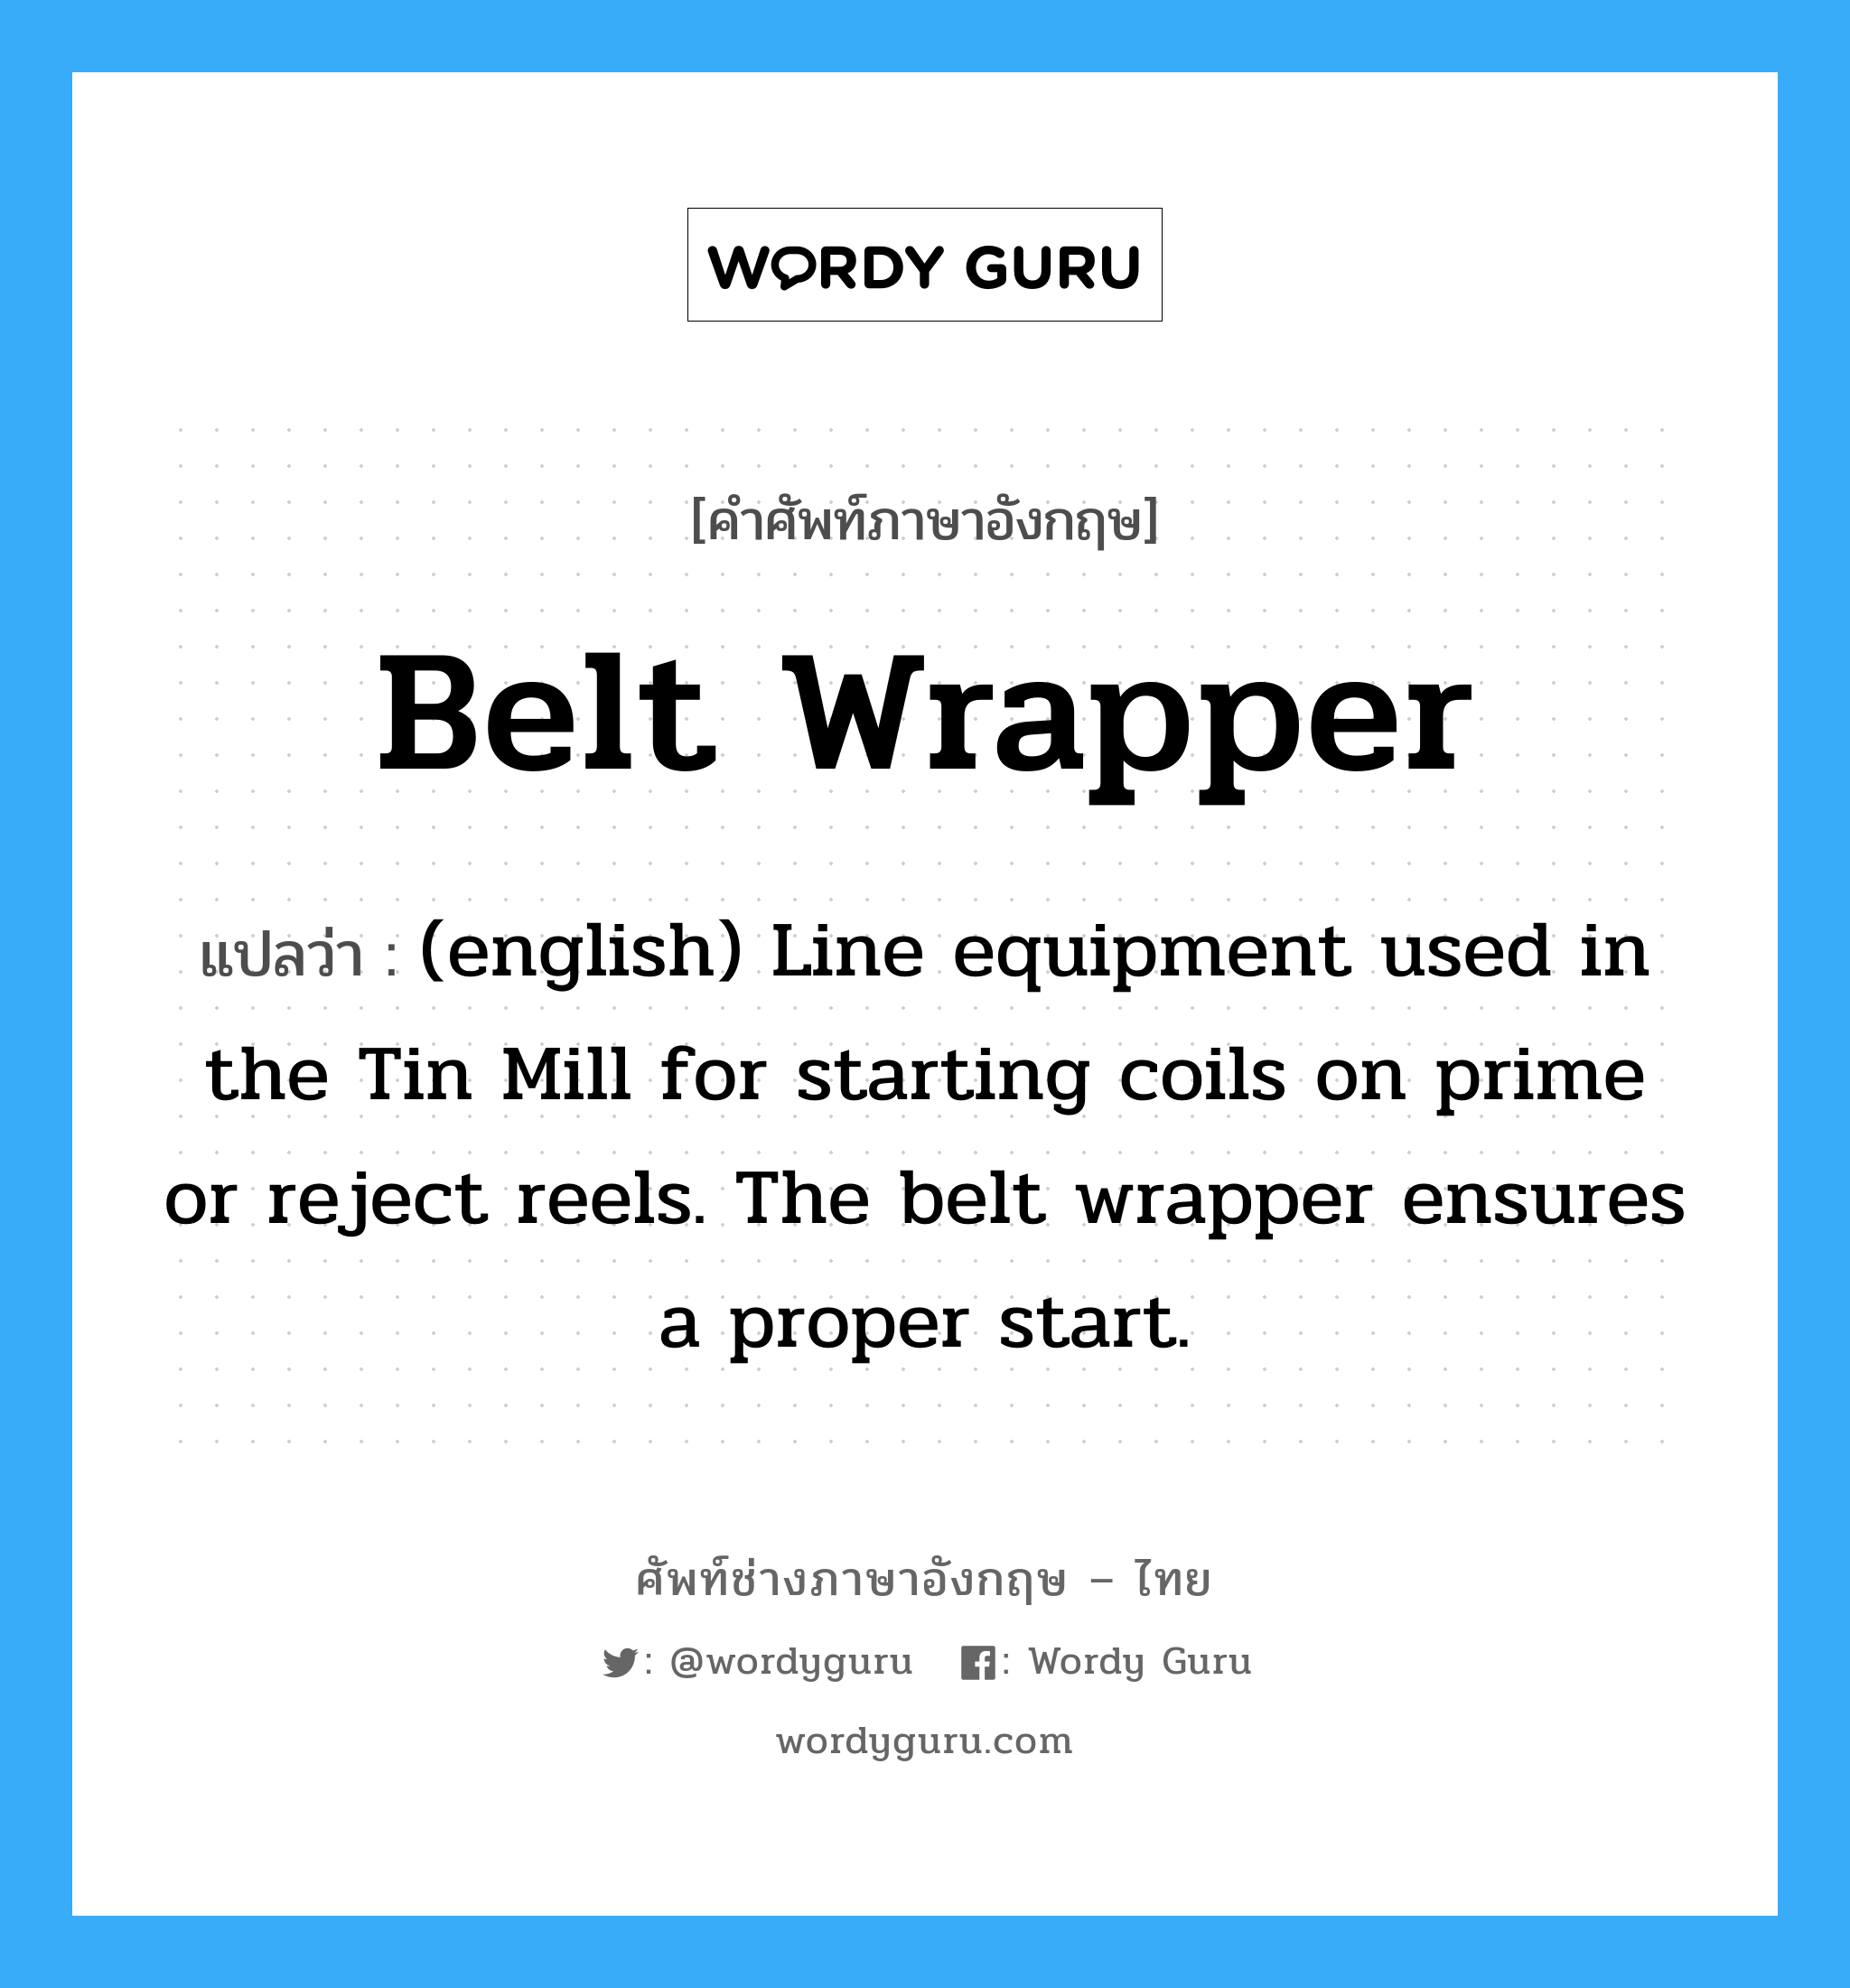 Belt Wrapper แปลว่า?, คำศัพท์ช่างภาษาอังกฤษ - ไทย Belt Wrapper คำศัพท์ภาษาอังกฤษ Belt Wrapper แปลว่า (english) Line equipment used in the Tin Mill for starting coils on prime or reject reels. The belt wrapper ensures a proper start.